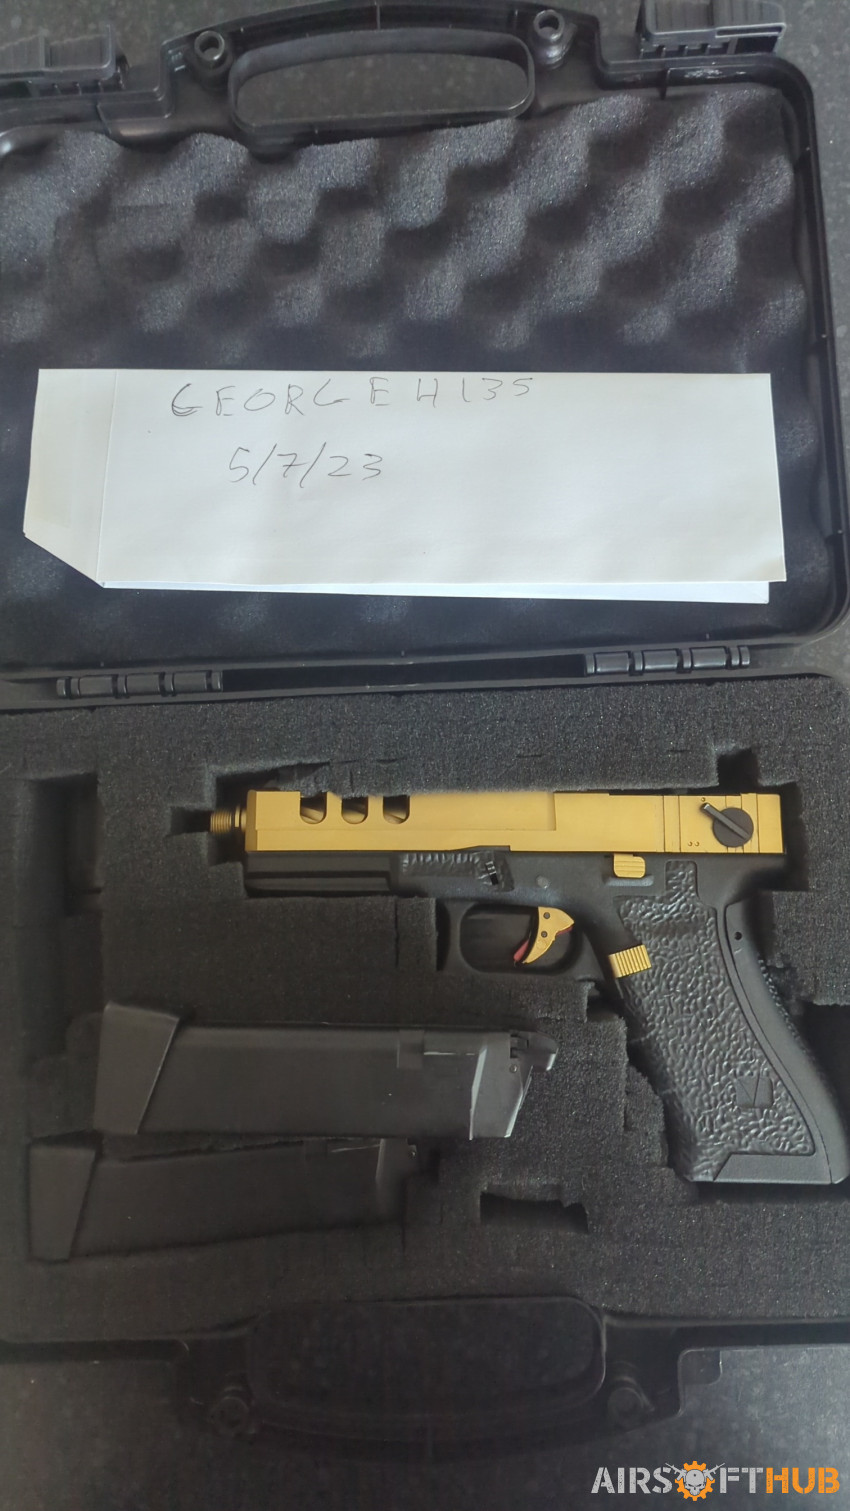 Vorsk vented glock - Used airsoft equipment